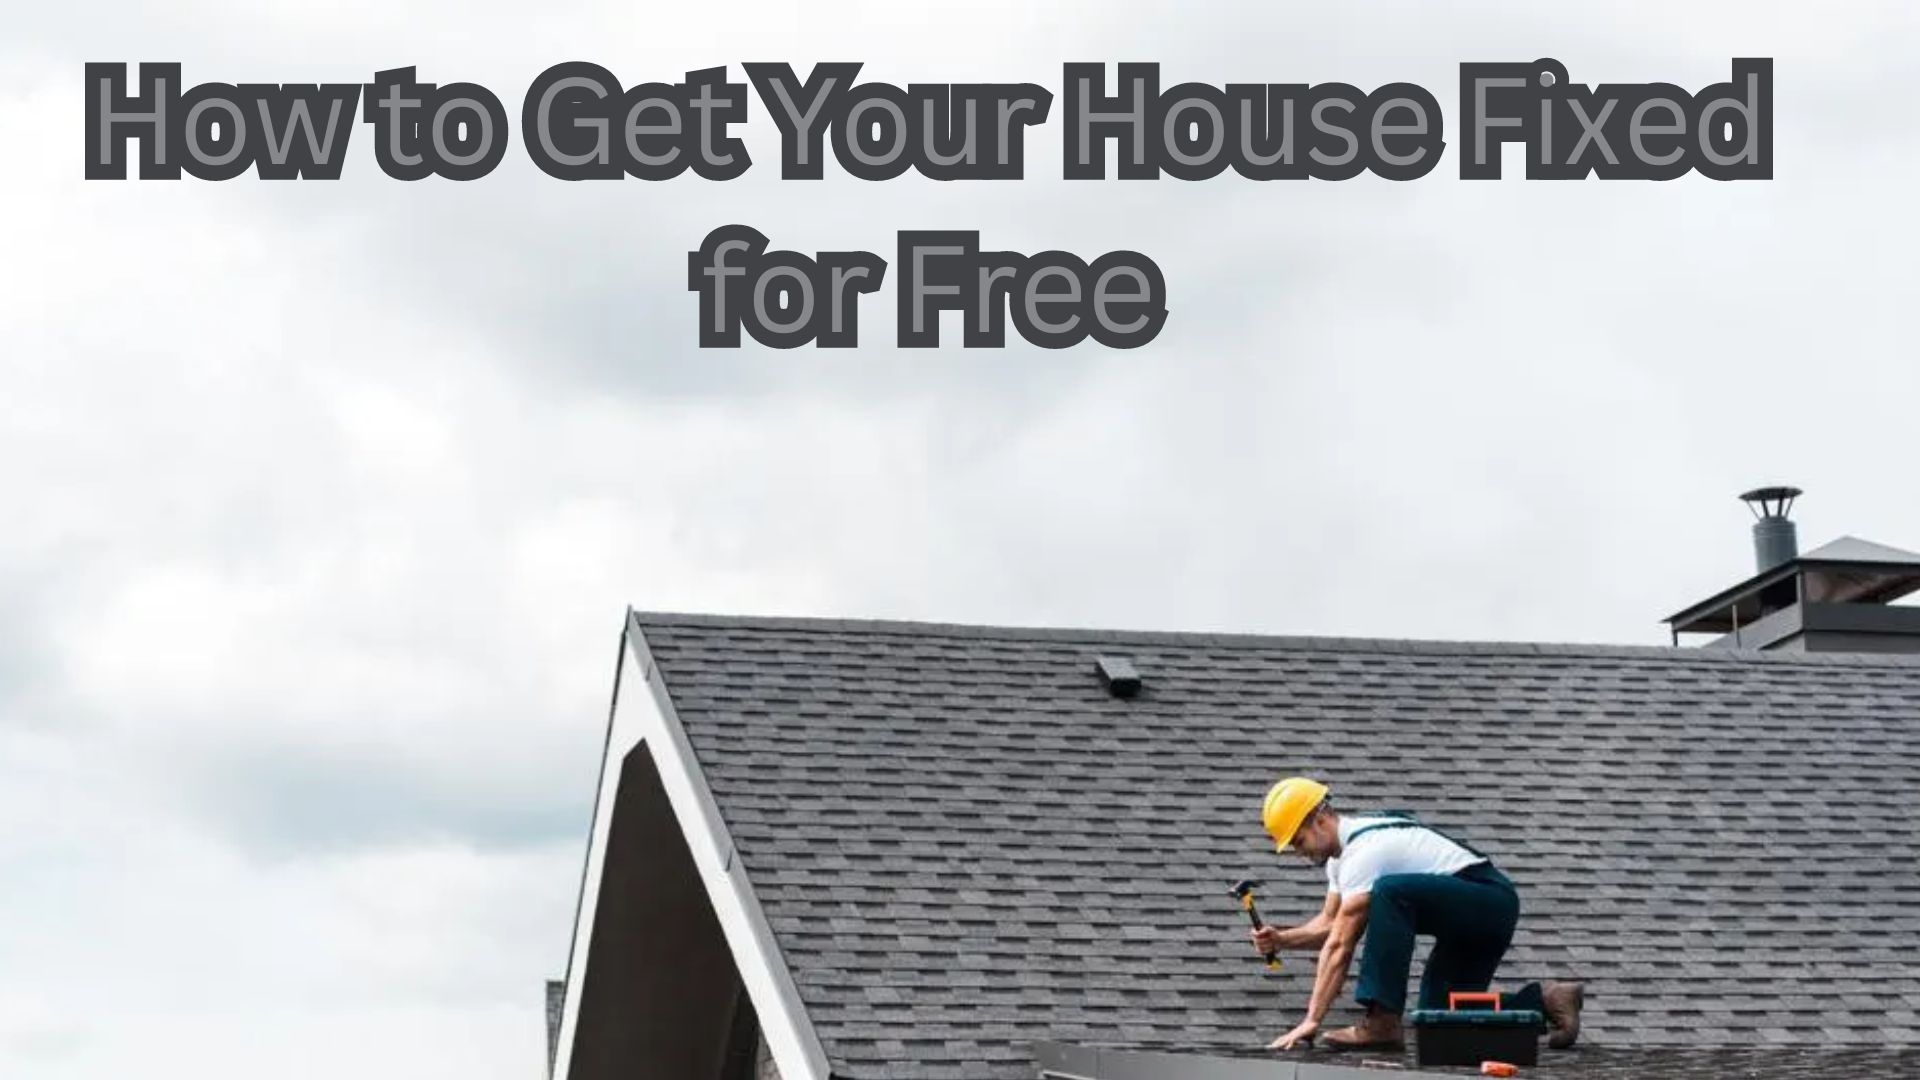 How to Get Your House Fixed for Free.